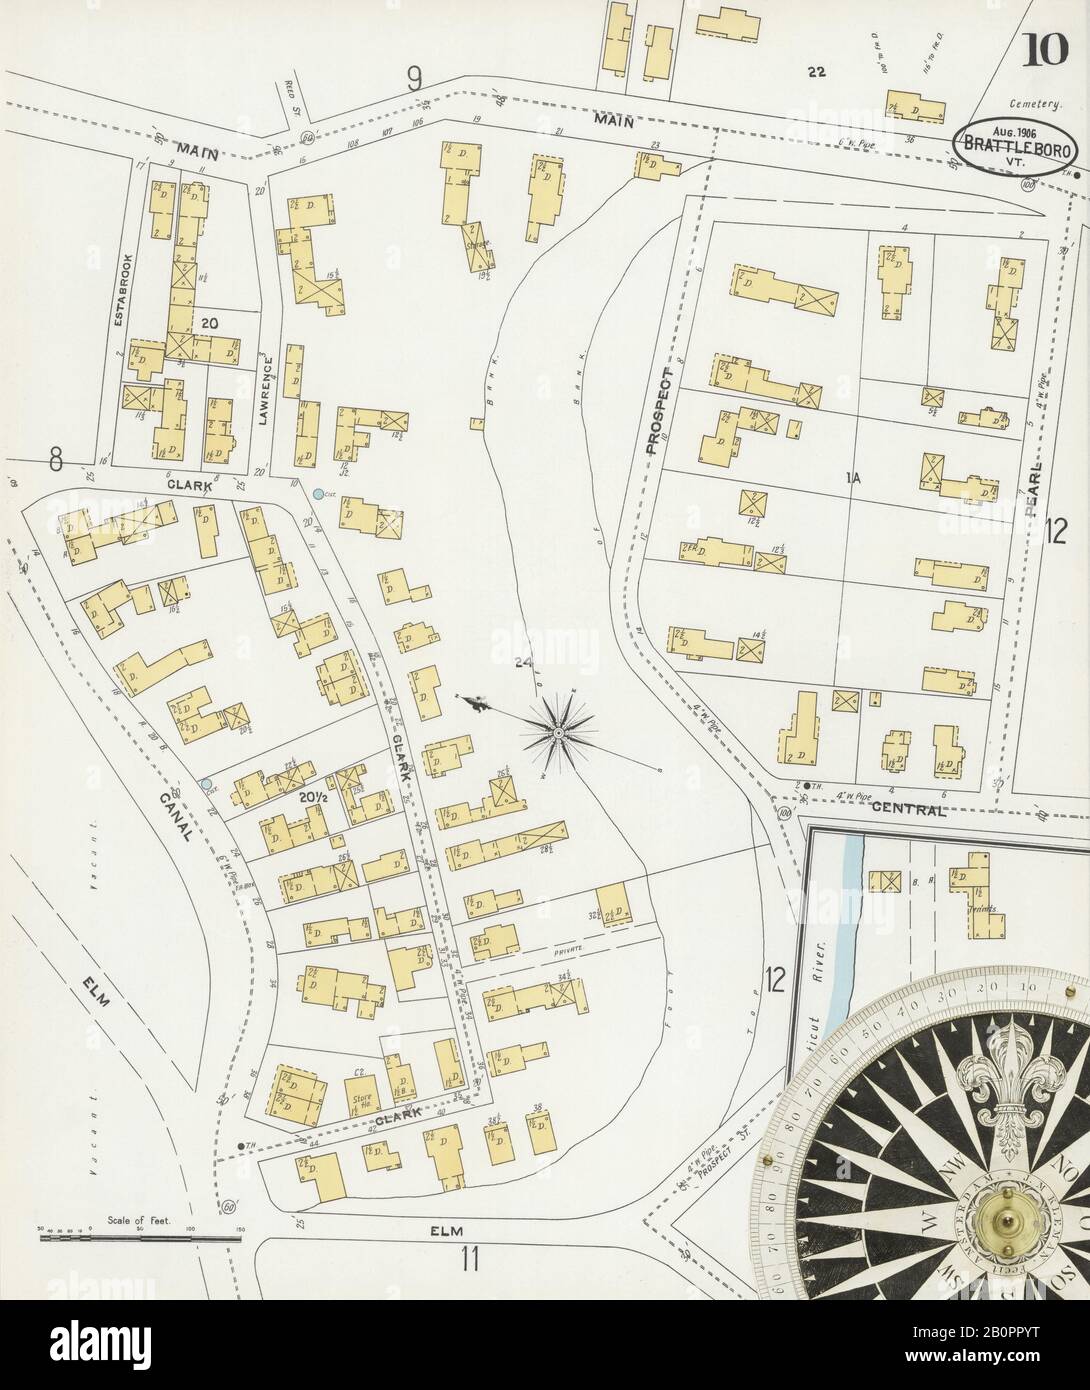 Image 10 of Sanborn Fire Insurance Map from Brattleboro, Windham County, Vermont. Aug 1906. 14 Sheet(s), America, street map with a Nineteenth Century compass Stock Photo